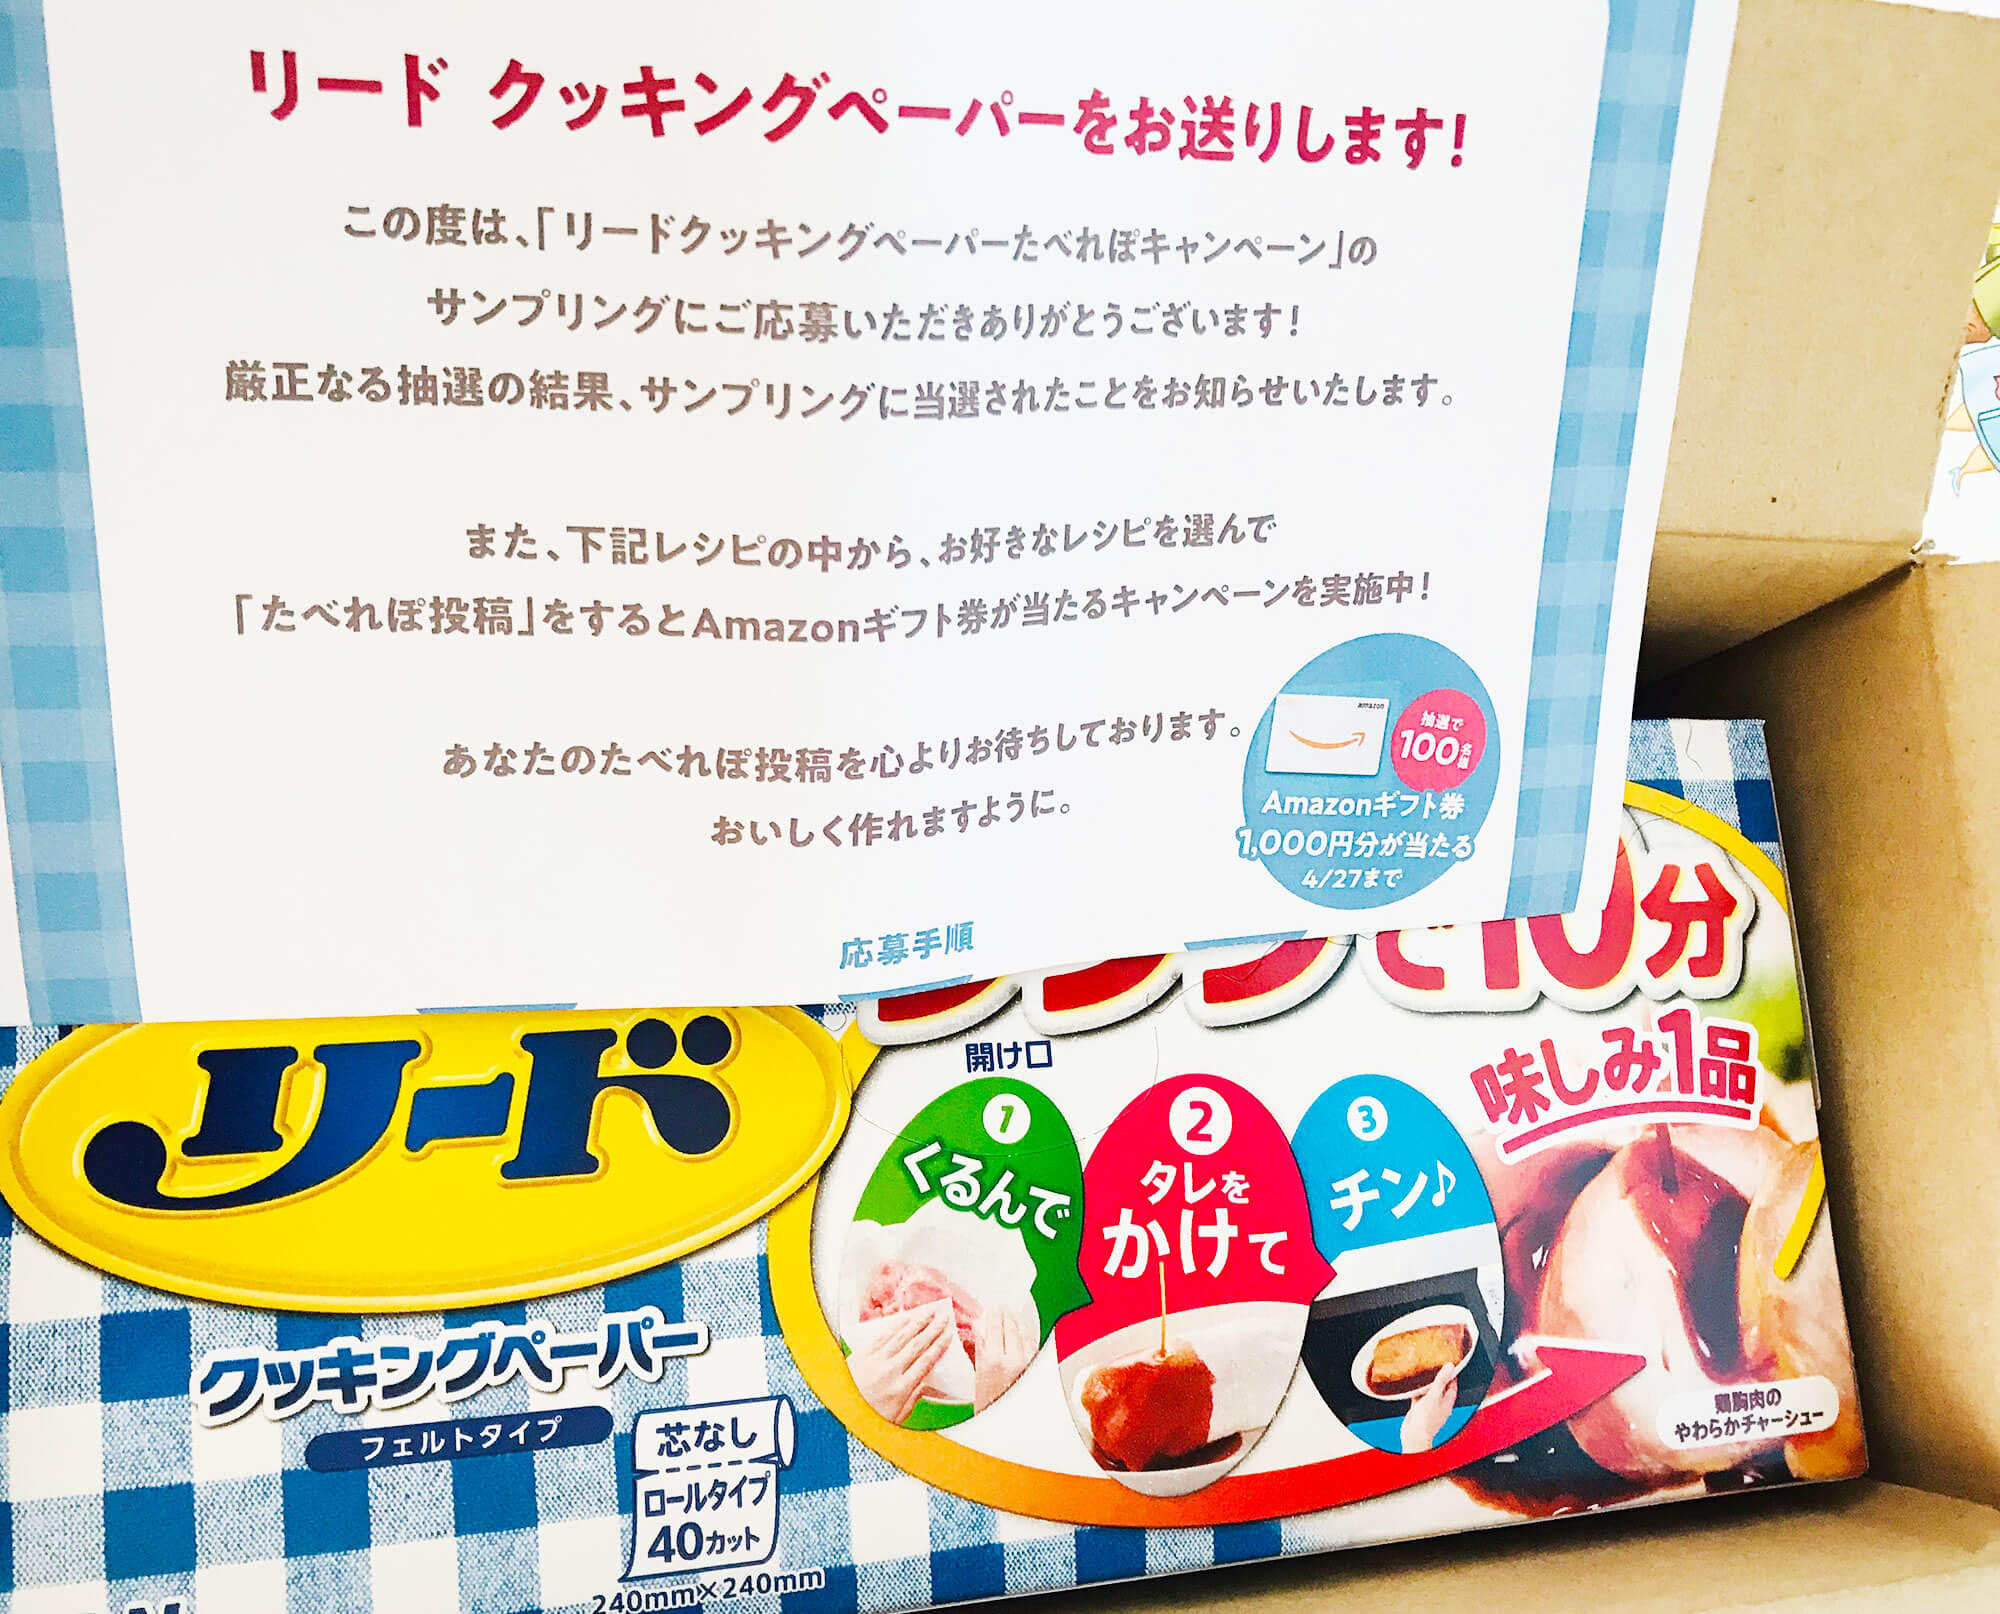 Cooking paper from Japan